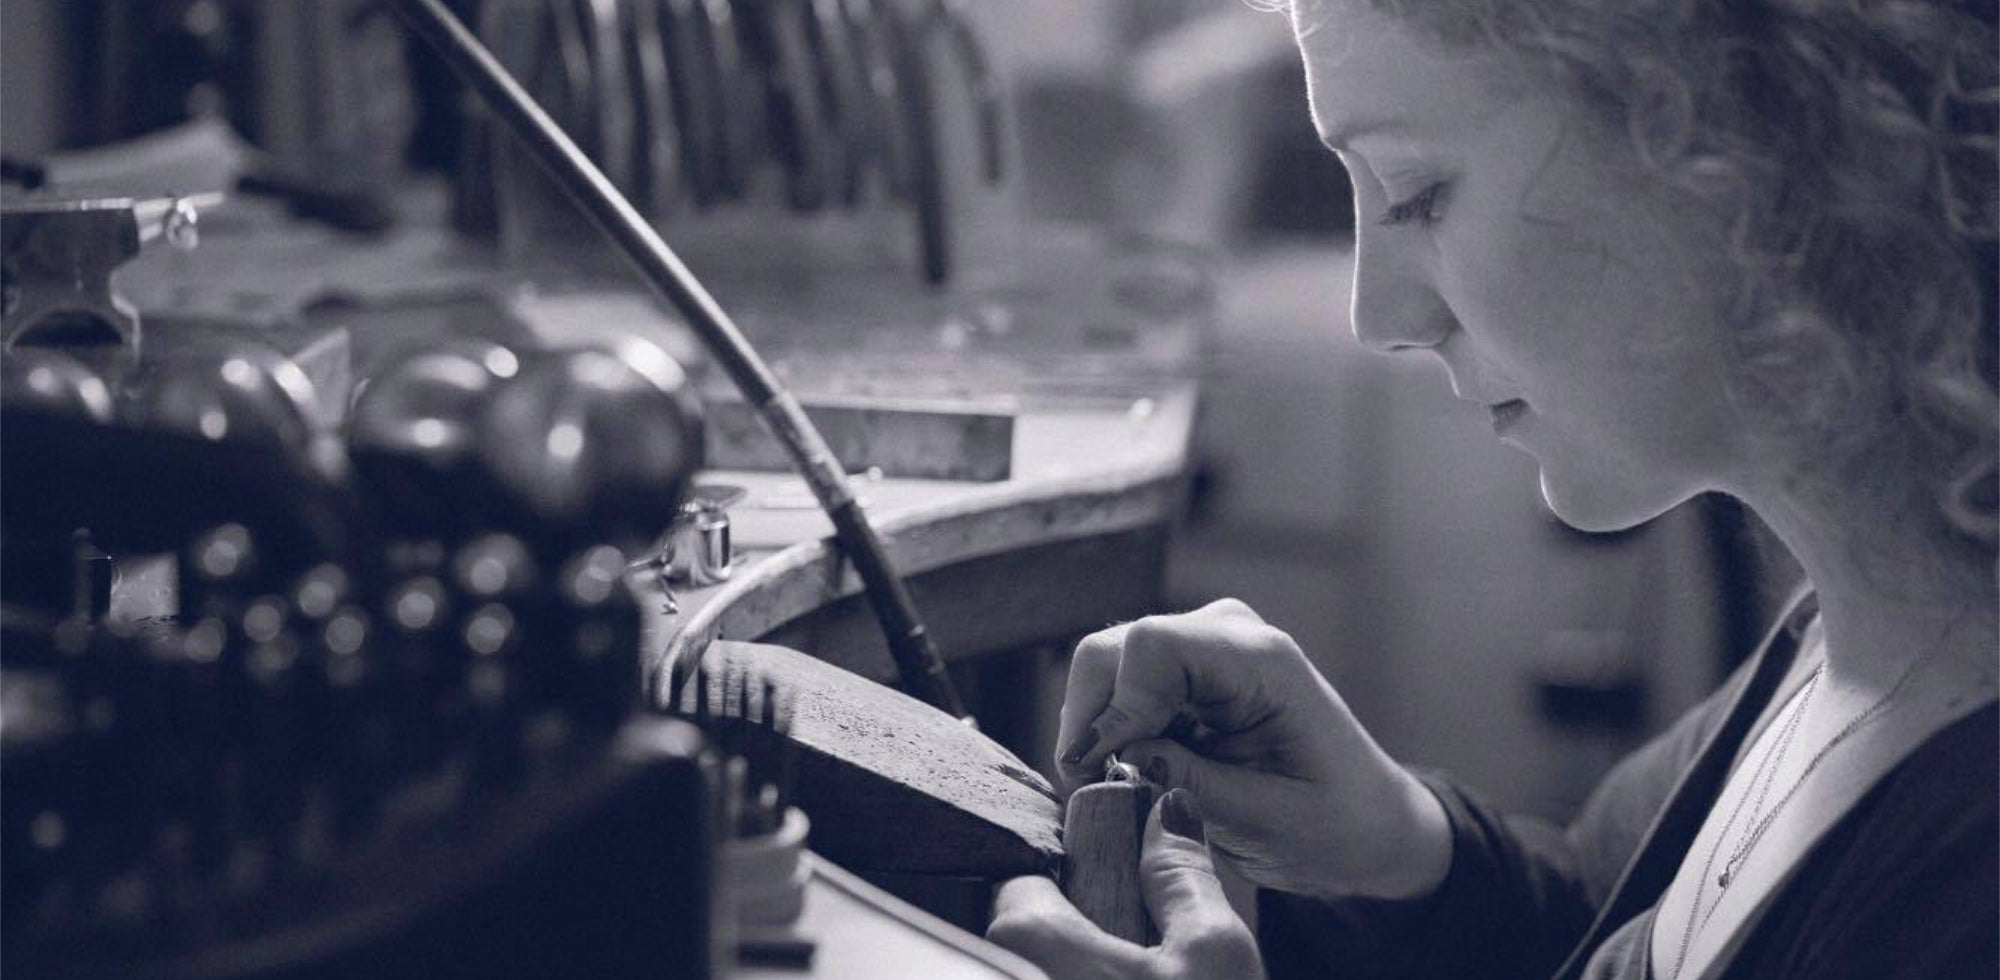 Independent jeweller Erin Cox making a bespoke engagement ring at her workbench